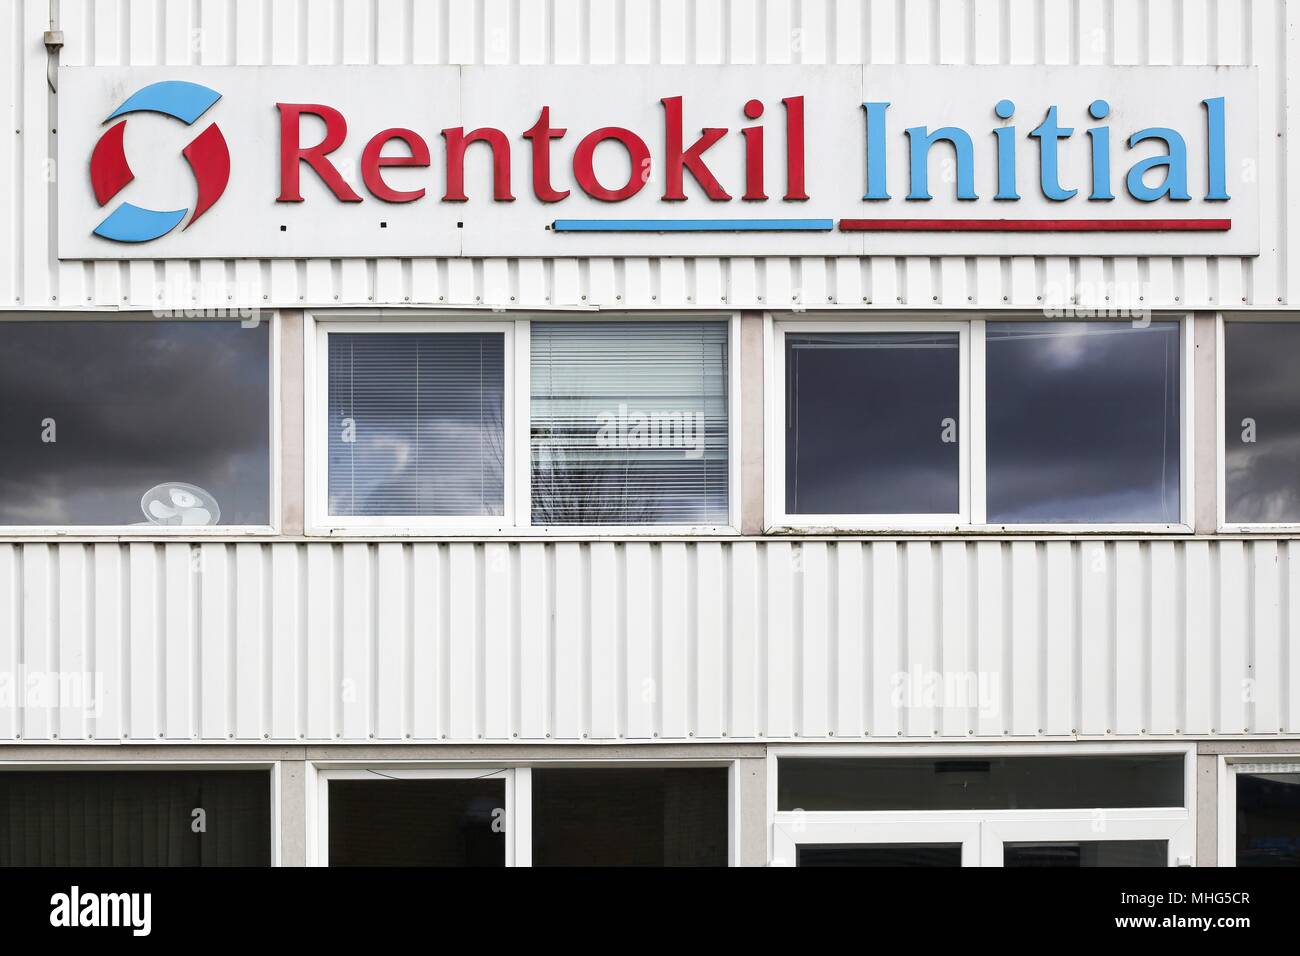 Ega, Denmark - April 27, 2018: Rentokil Initial is a British business services group. Rentokil is specialized in hygiene services for compagnies Stock Photo